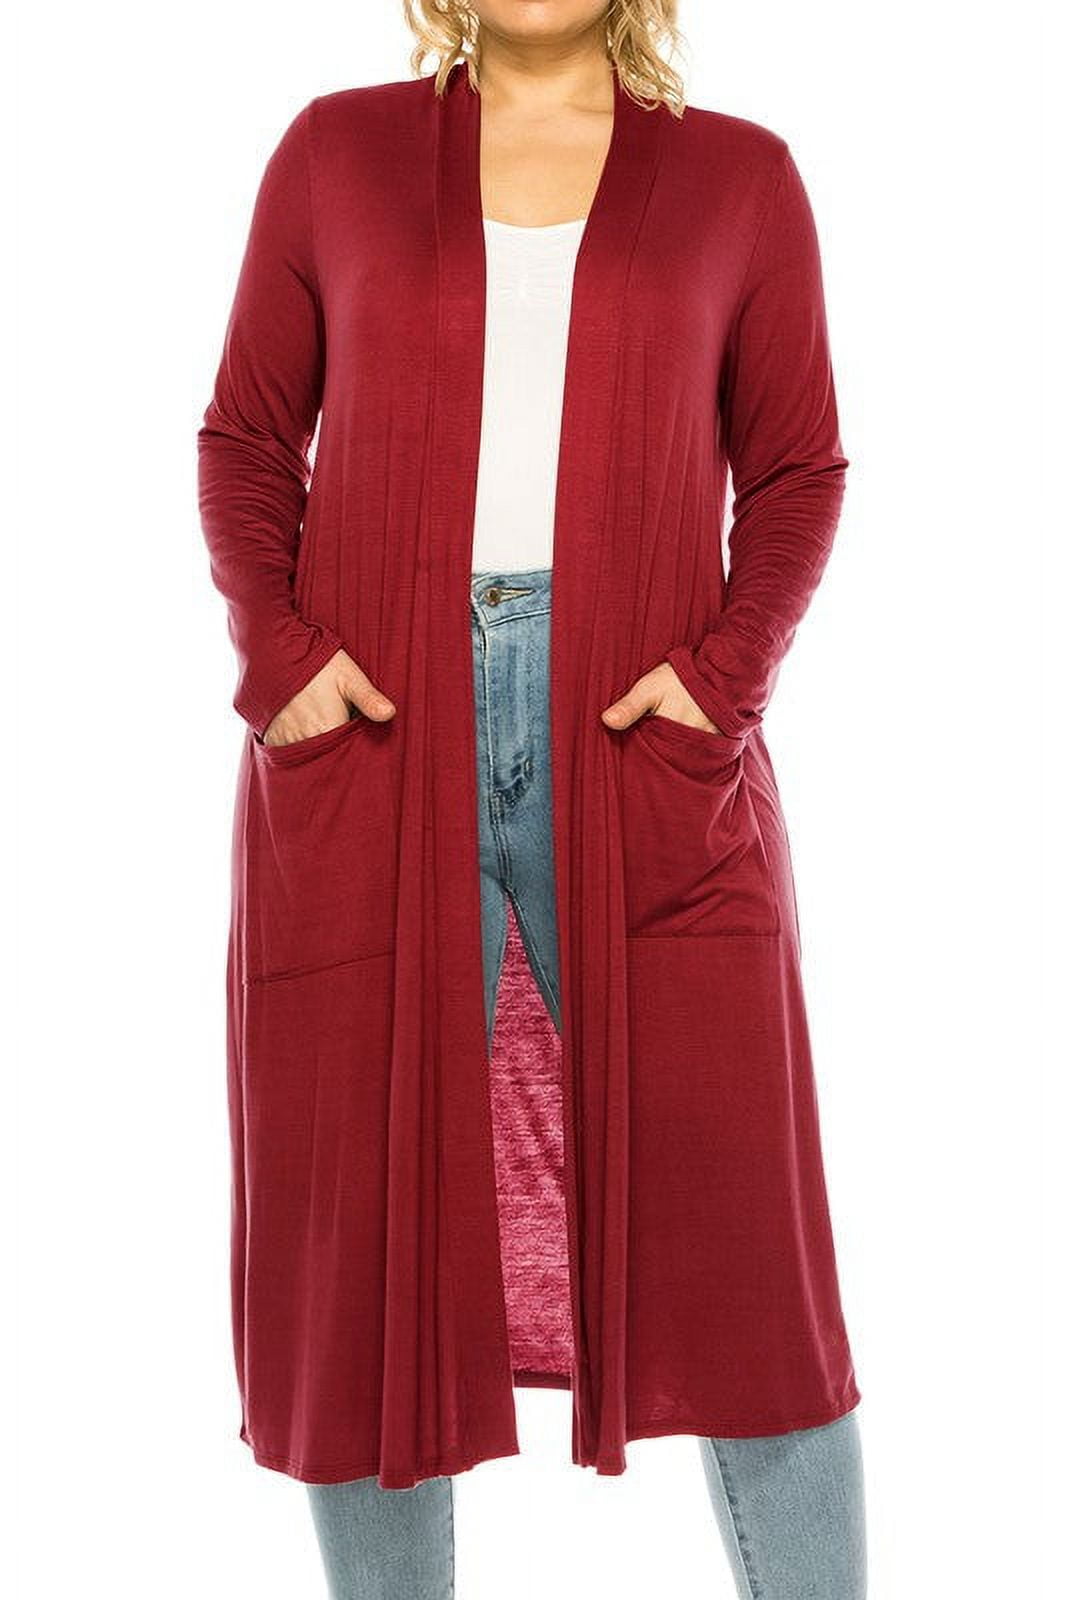 Fashion Bug NWT Plus Size Red Cardigan Sweater 22/24 - $20 (47% Off Retail)  New With Tags - From J